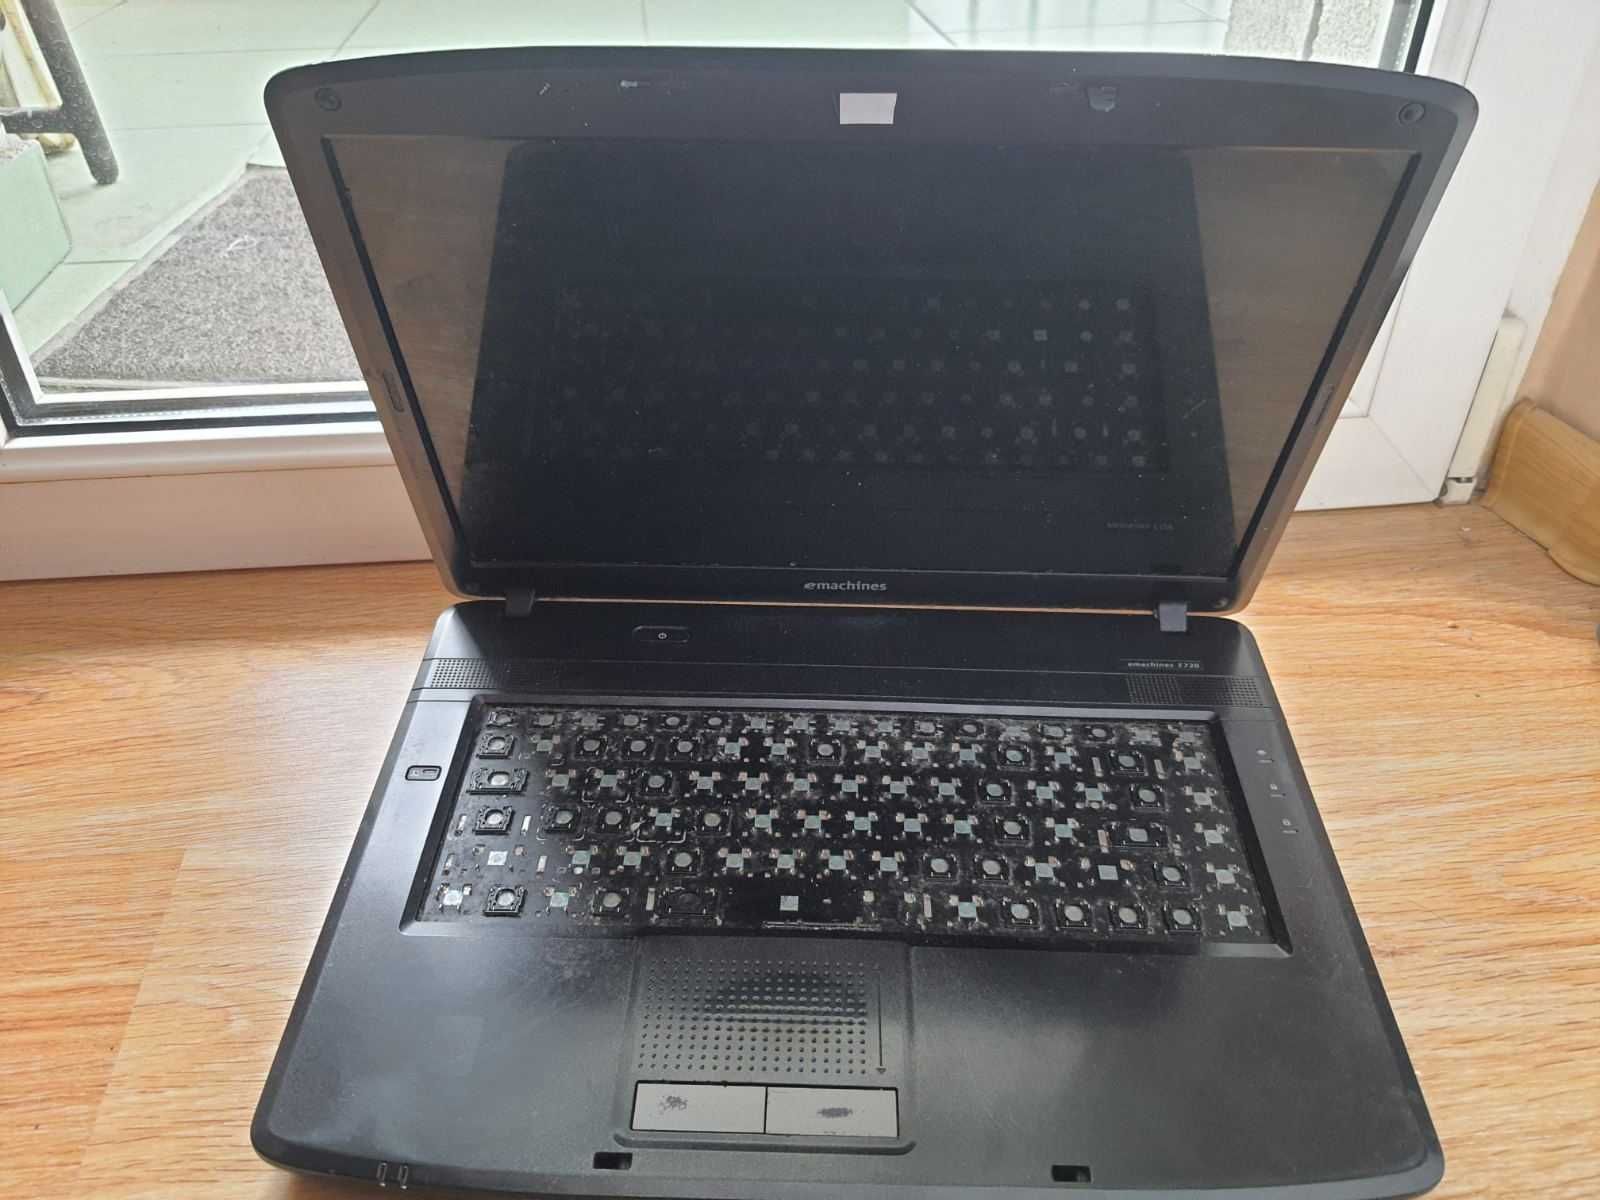 Laptop Acer Emachines E720